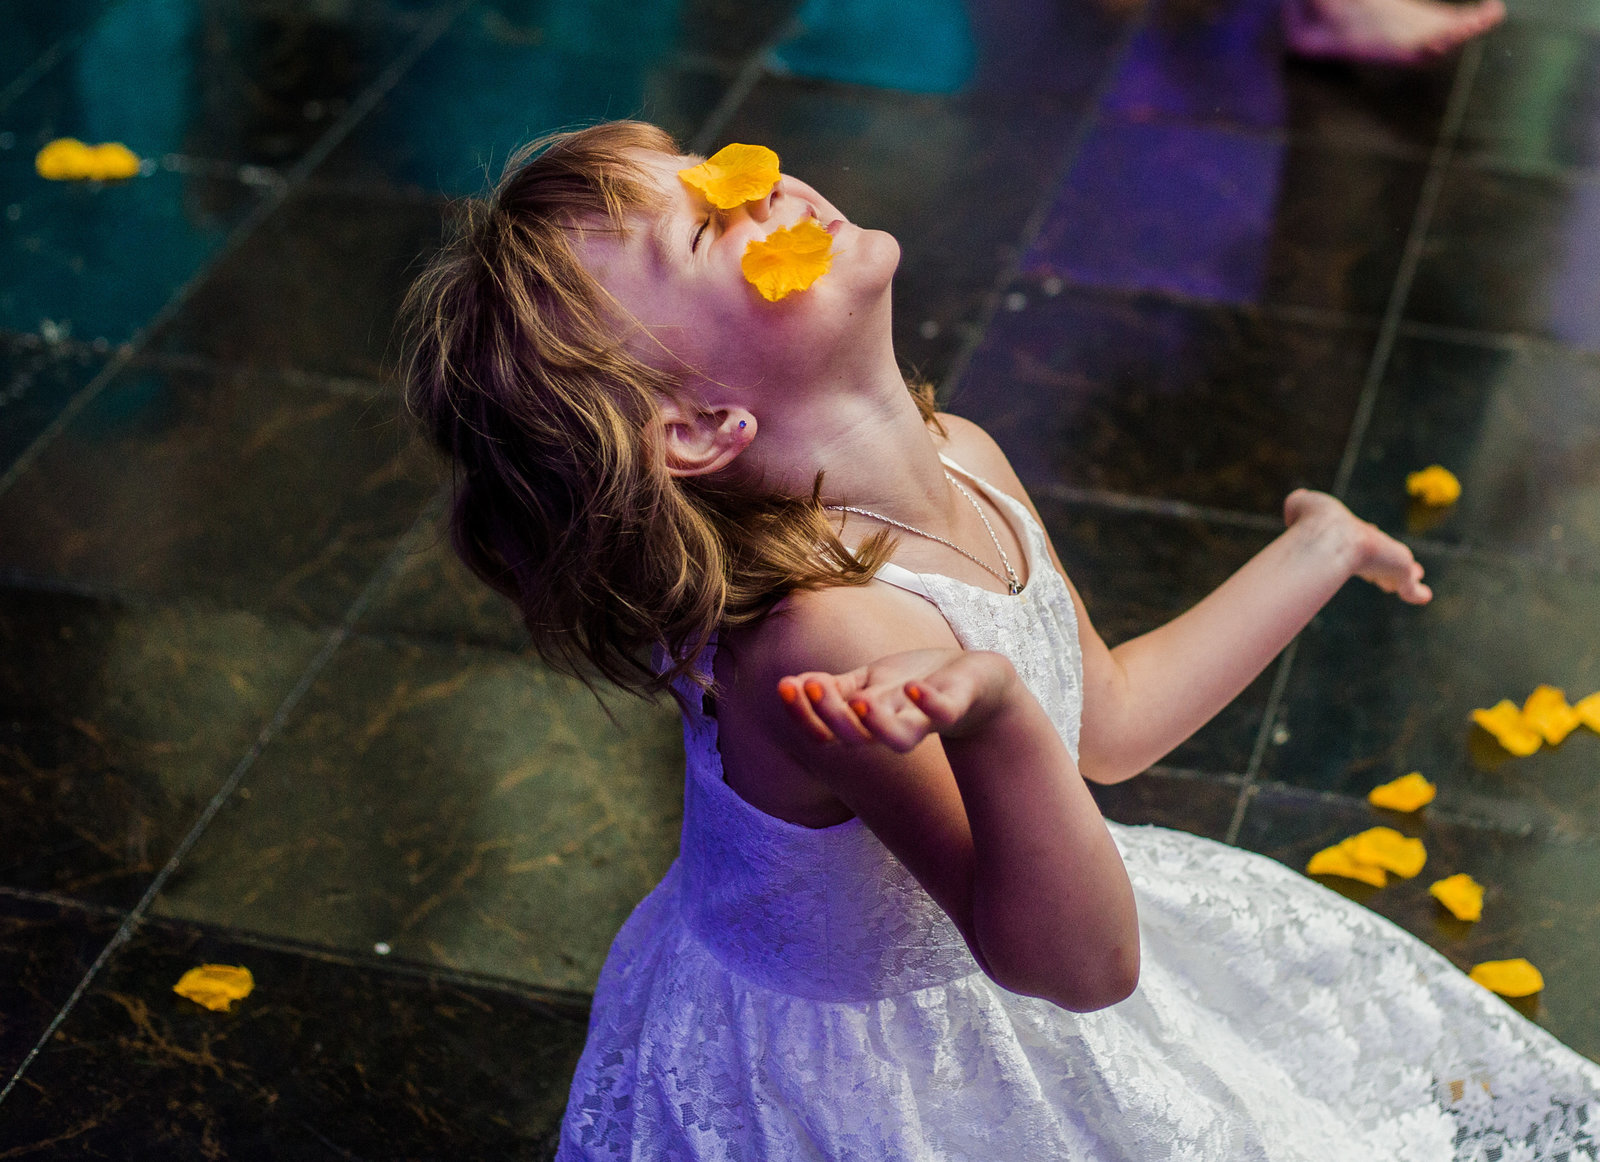 Child plays with flower petals during wedding reception at the Concourse at Union Station